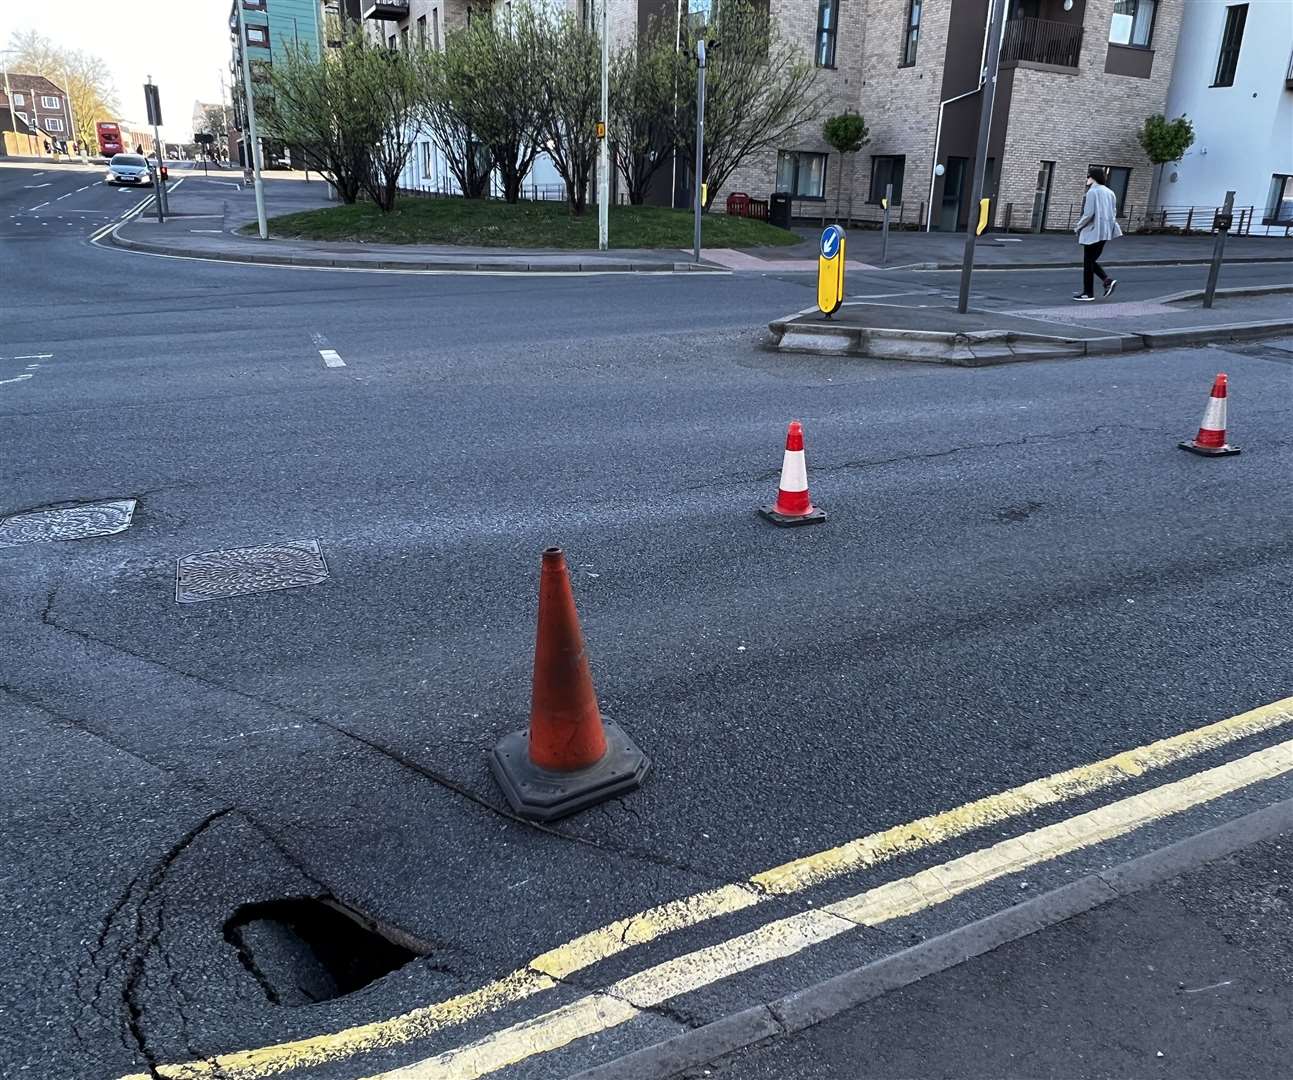 A large hole has opened up in Somerset Road, Ashford. Photo: Steve Salter